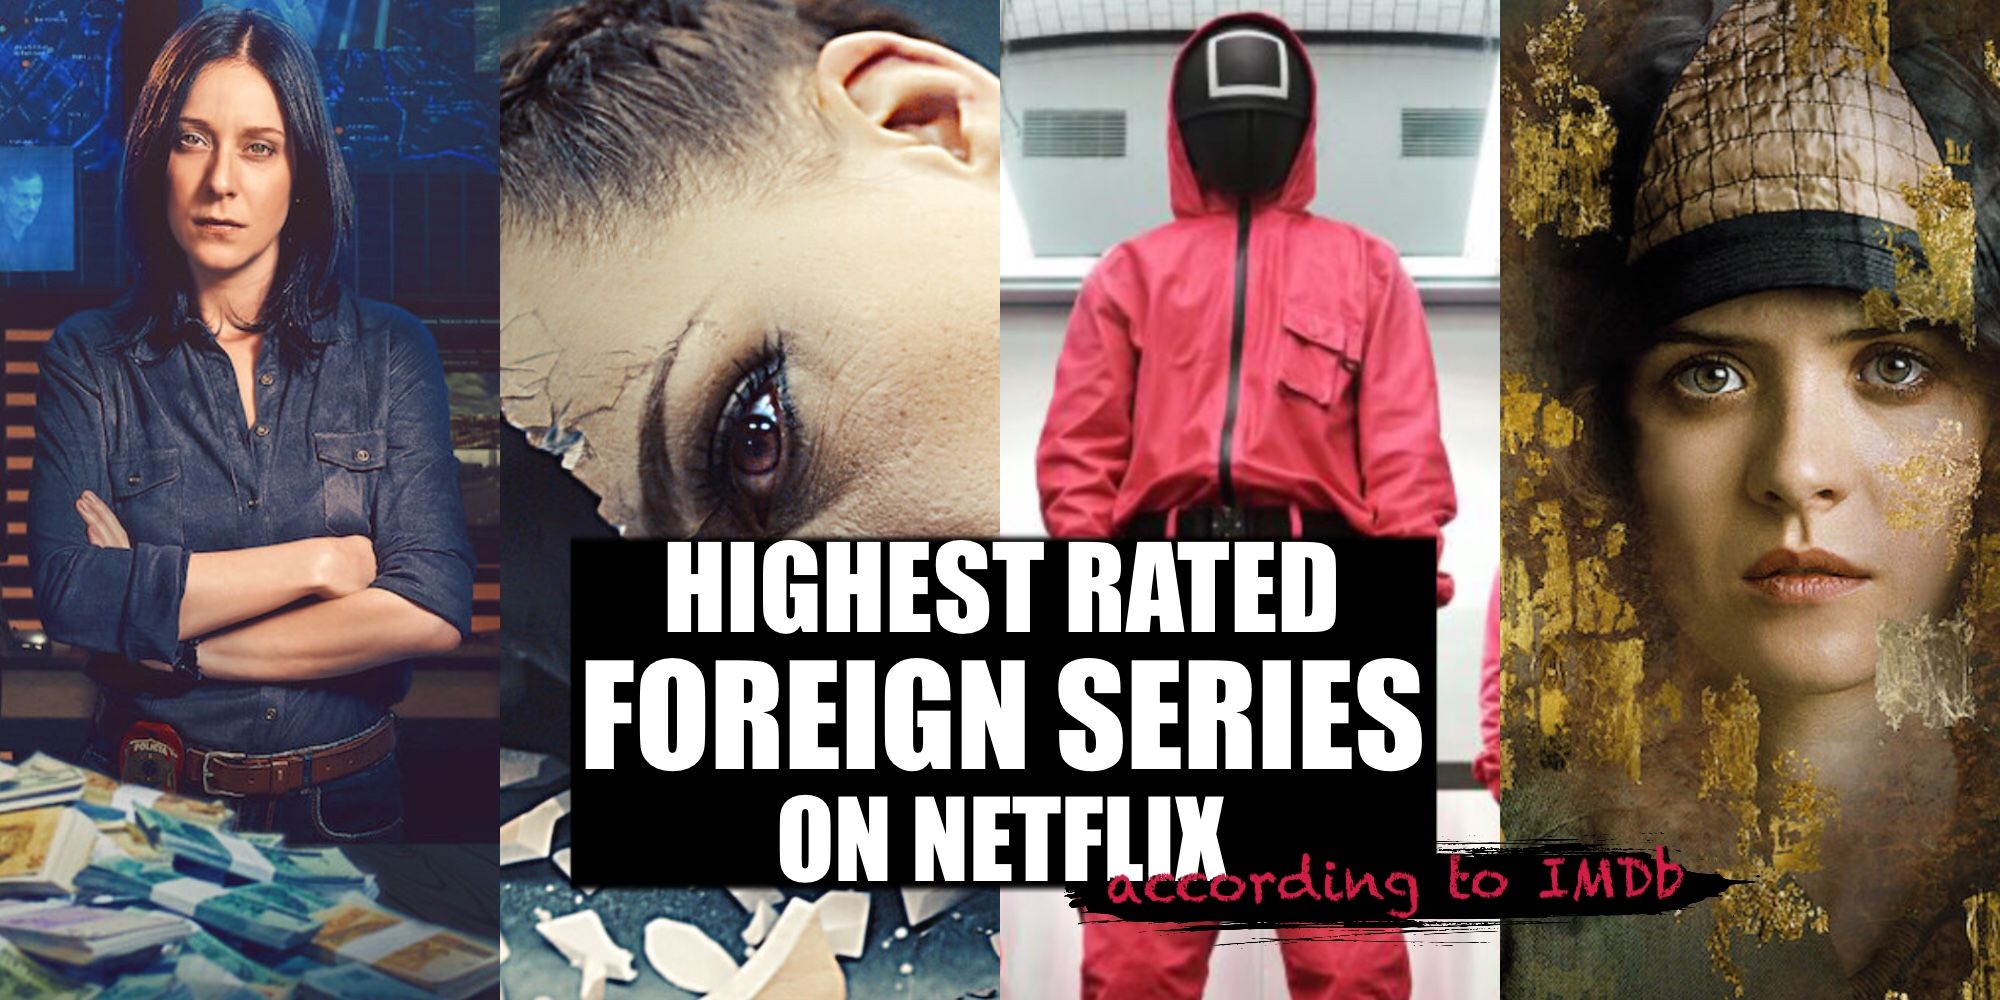 The Highest Rated Foreign Series On Netflix, According to IMDb